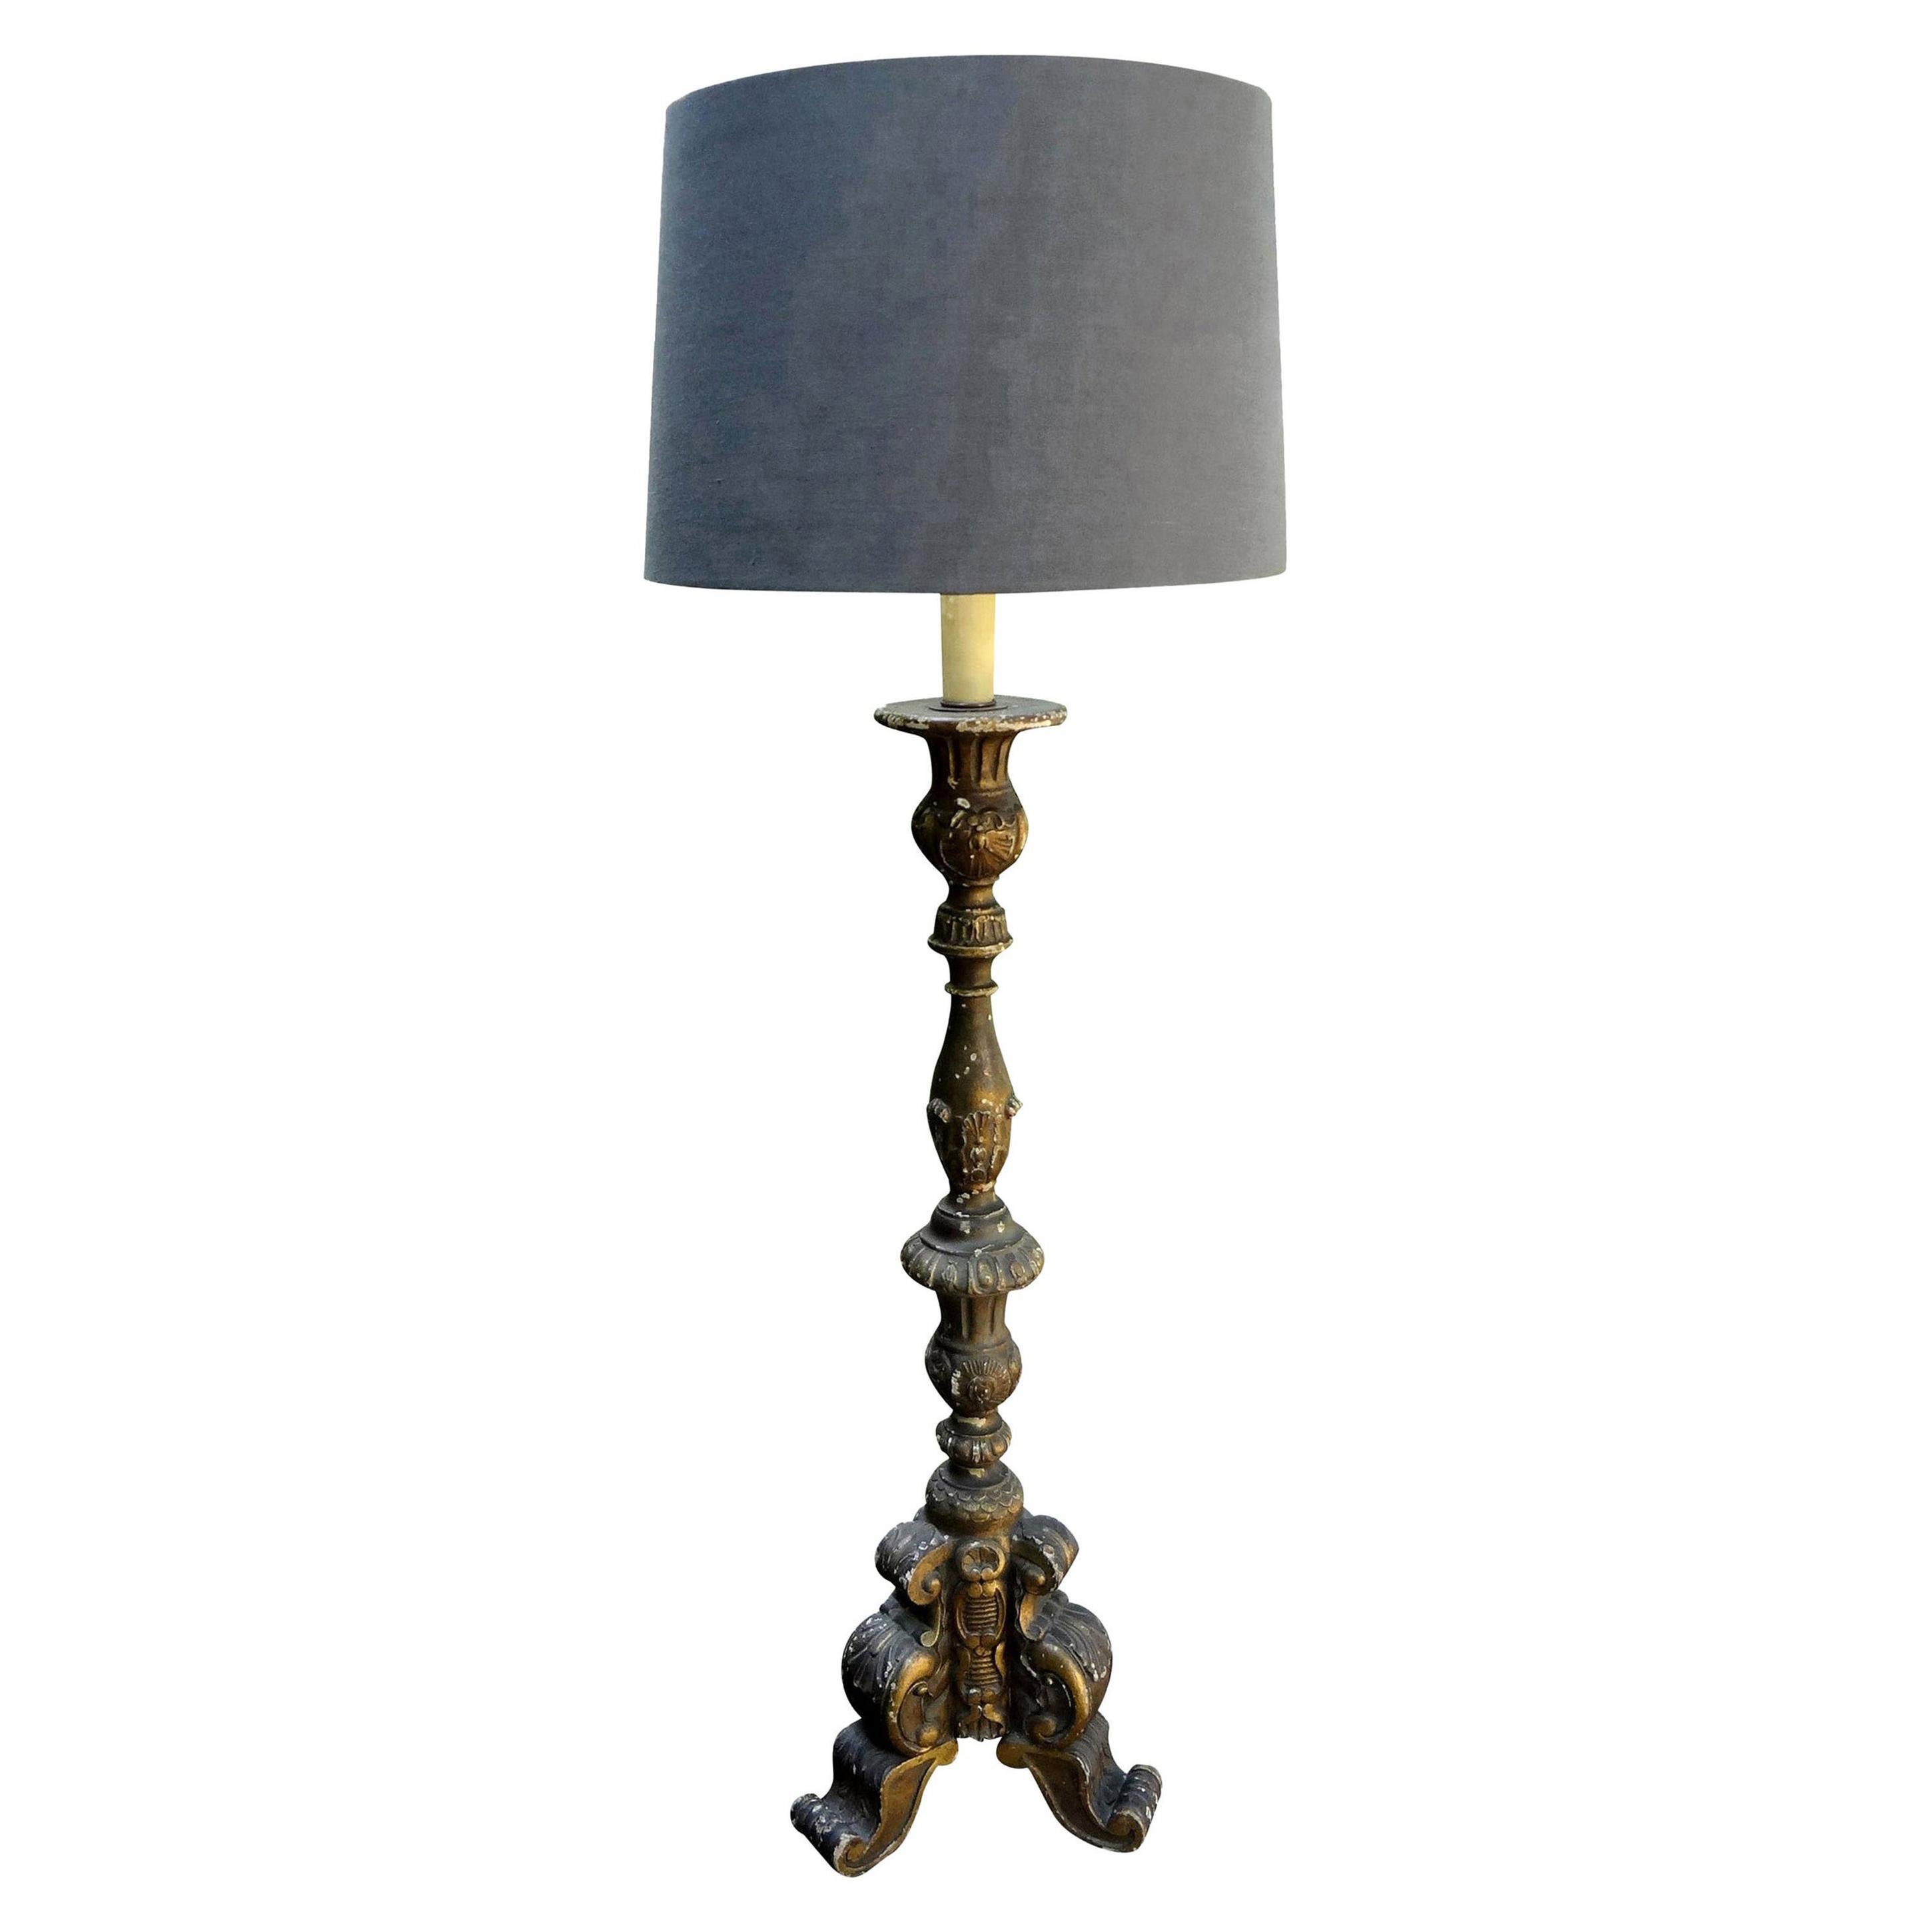 19th century Italian giltwood lamp.
Stunning tall 19th century Italian gilt wood candlestick or pricket that was converted into a table lamp. This gorgeous Italian giltwood lamp has been newly wired to U.S. specifications with a new socket and